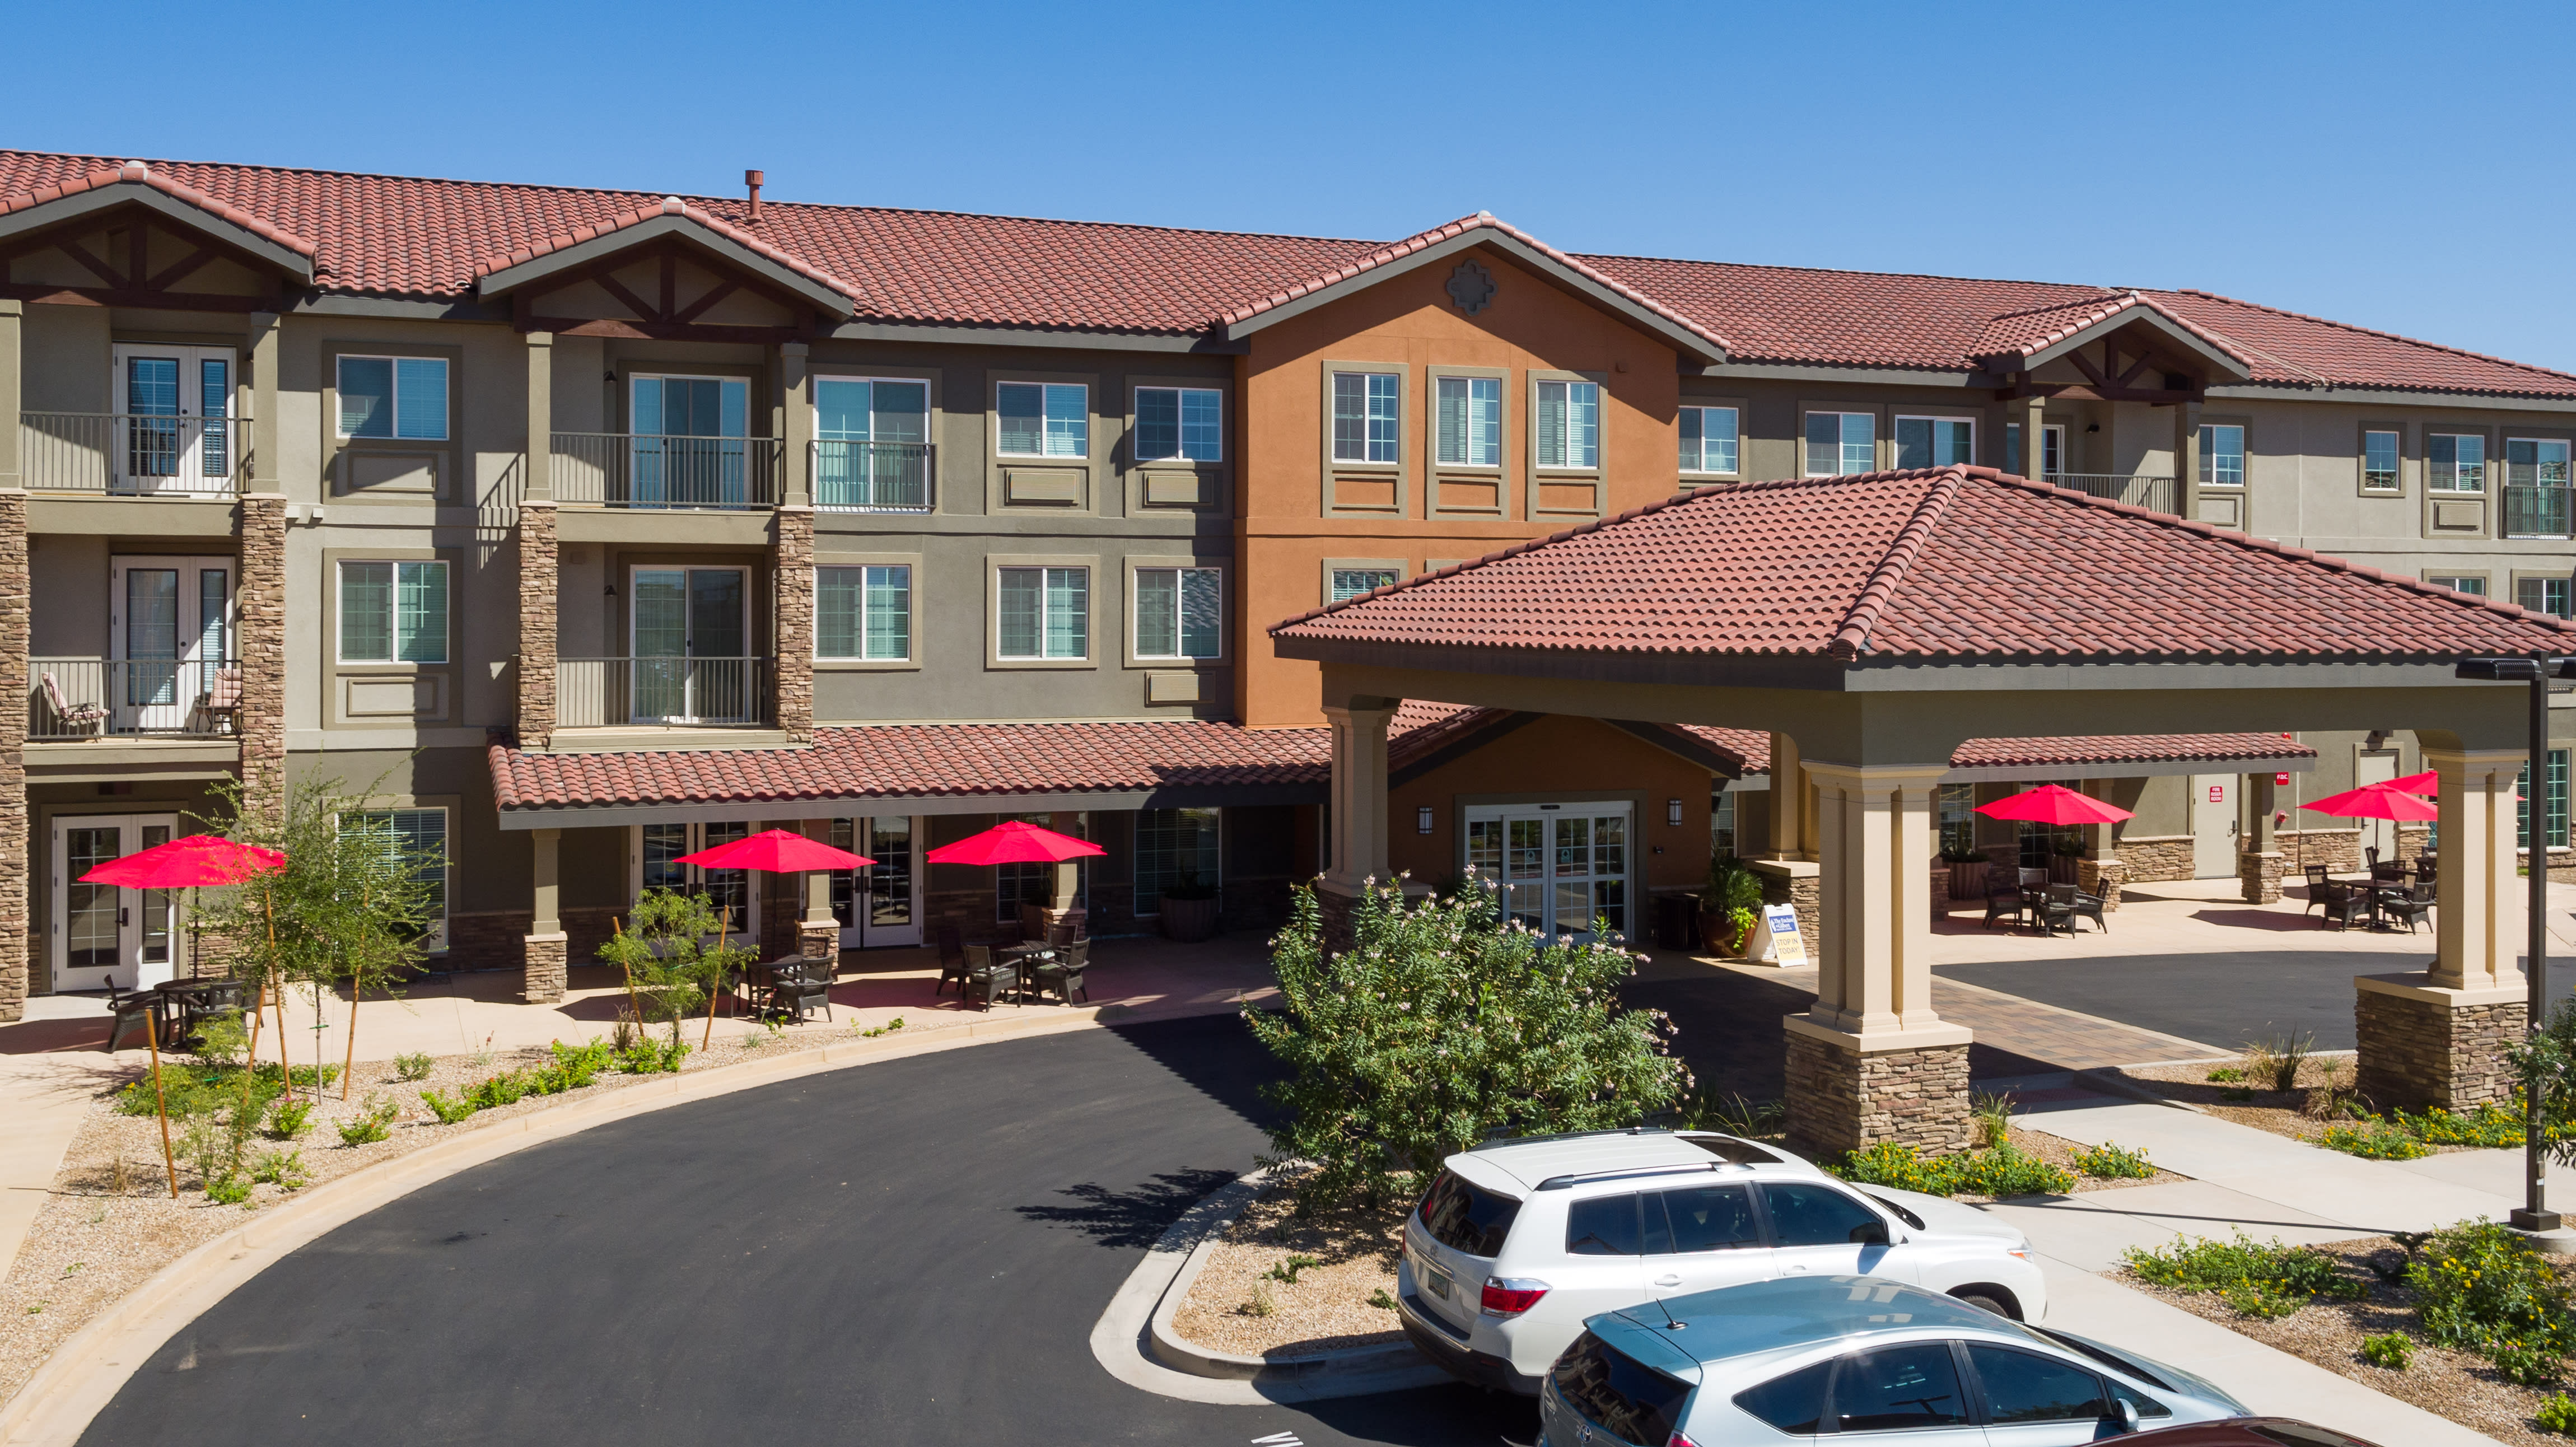 The Enclave at Gilbert Senior Living community exterior